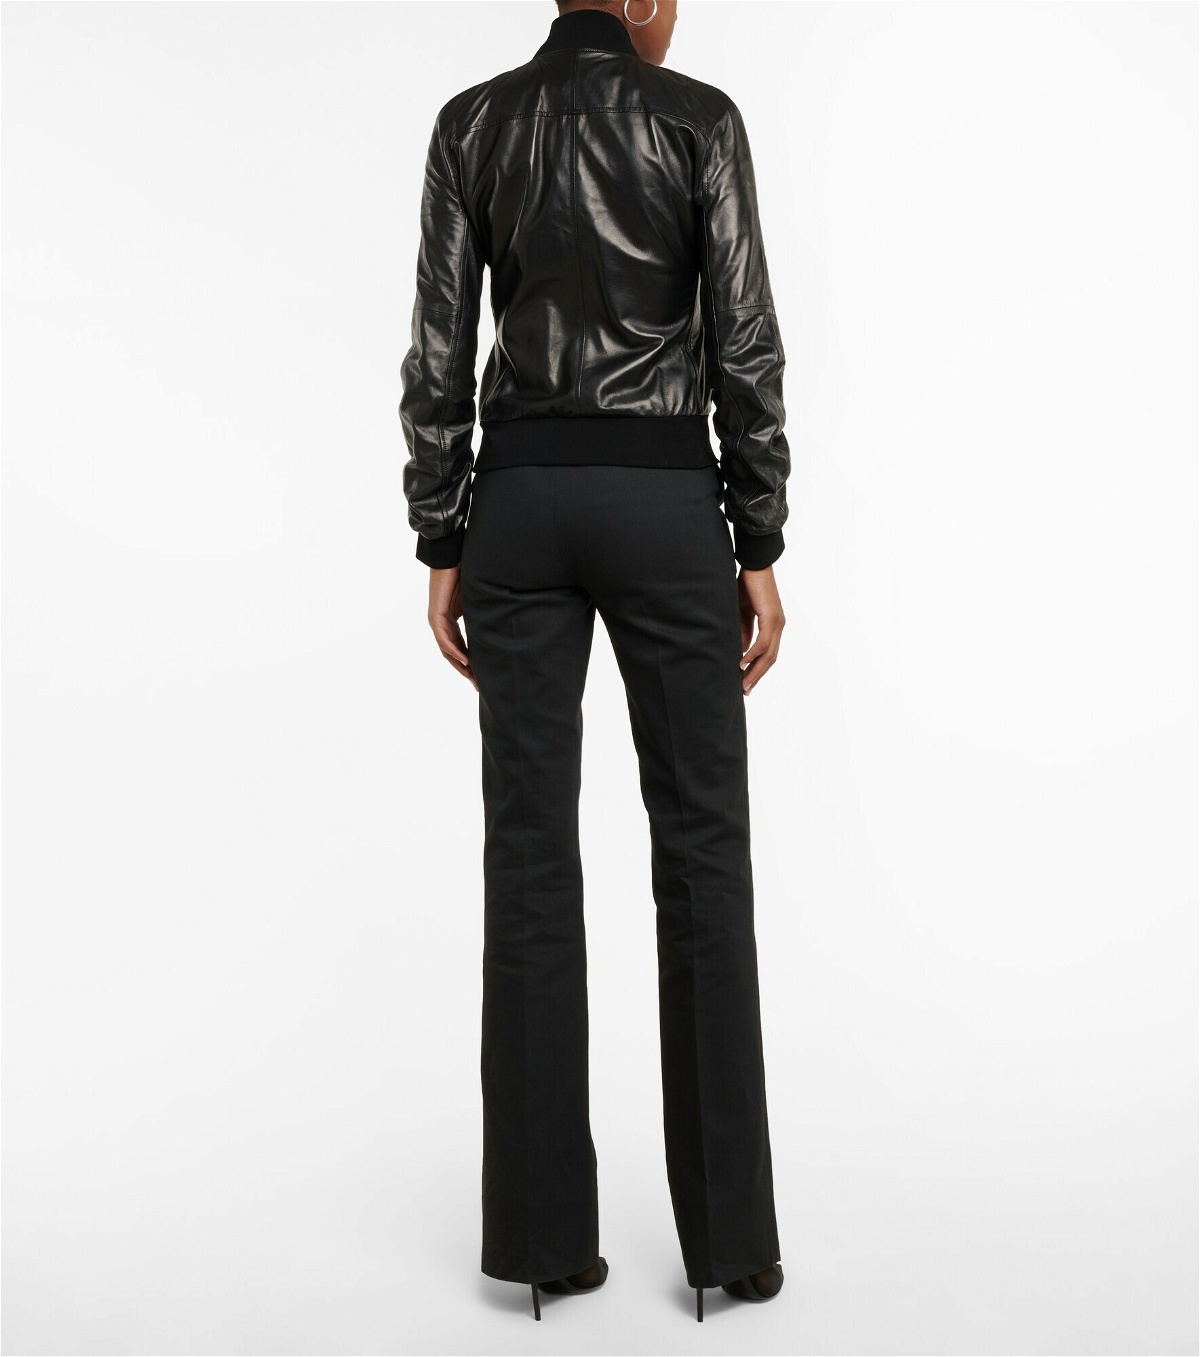 Tom Ford - Ruched leather jacket TOM FORD